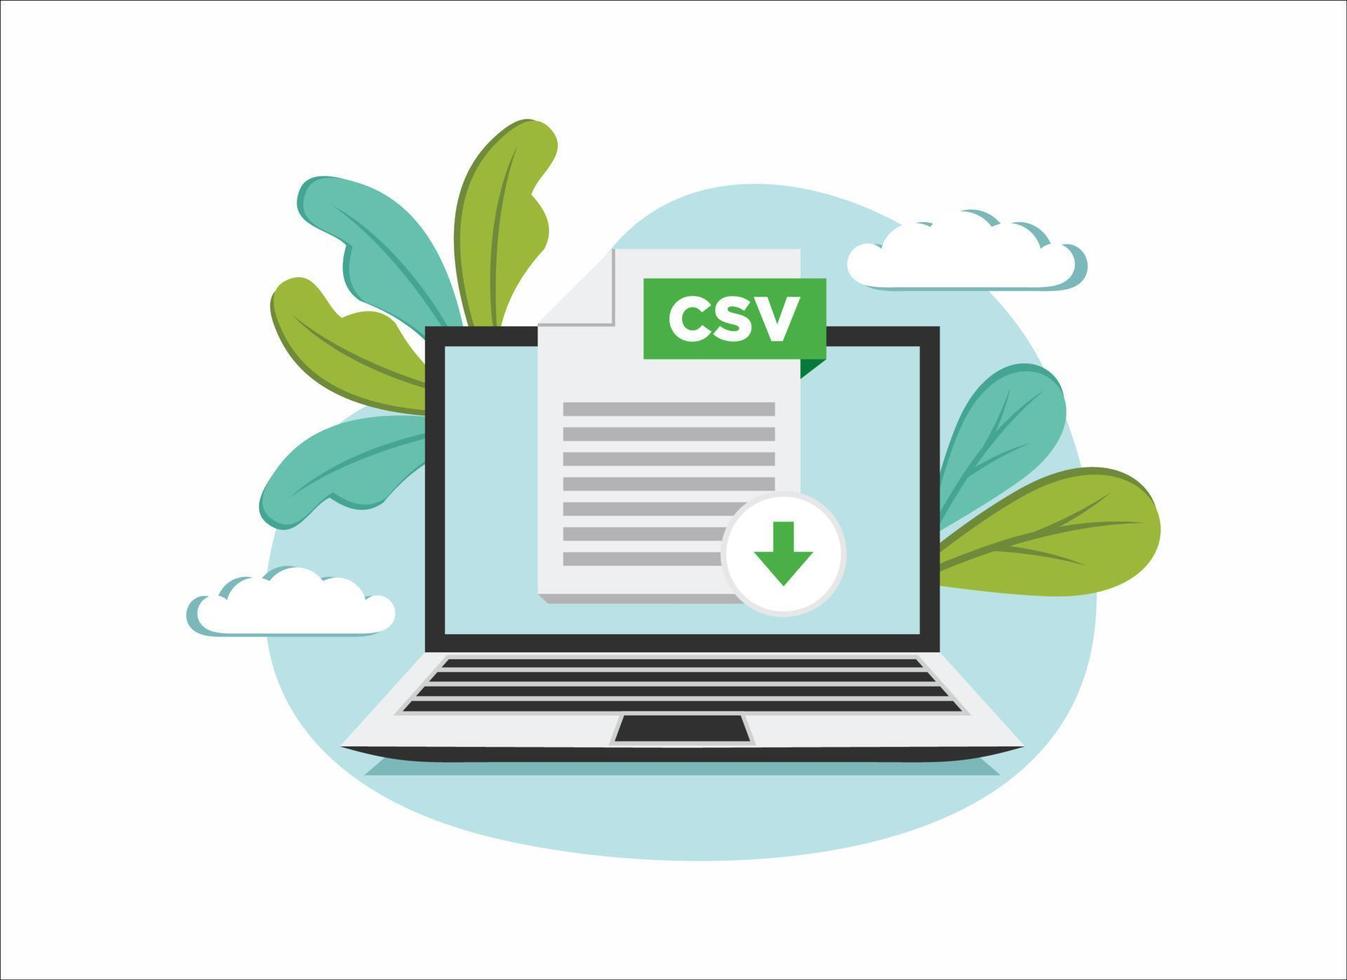 Download CSV icon file with label on laptop screen. Downloading document concept vector